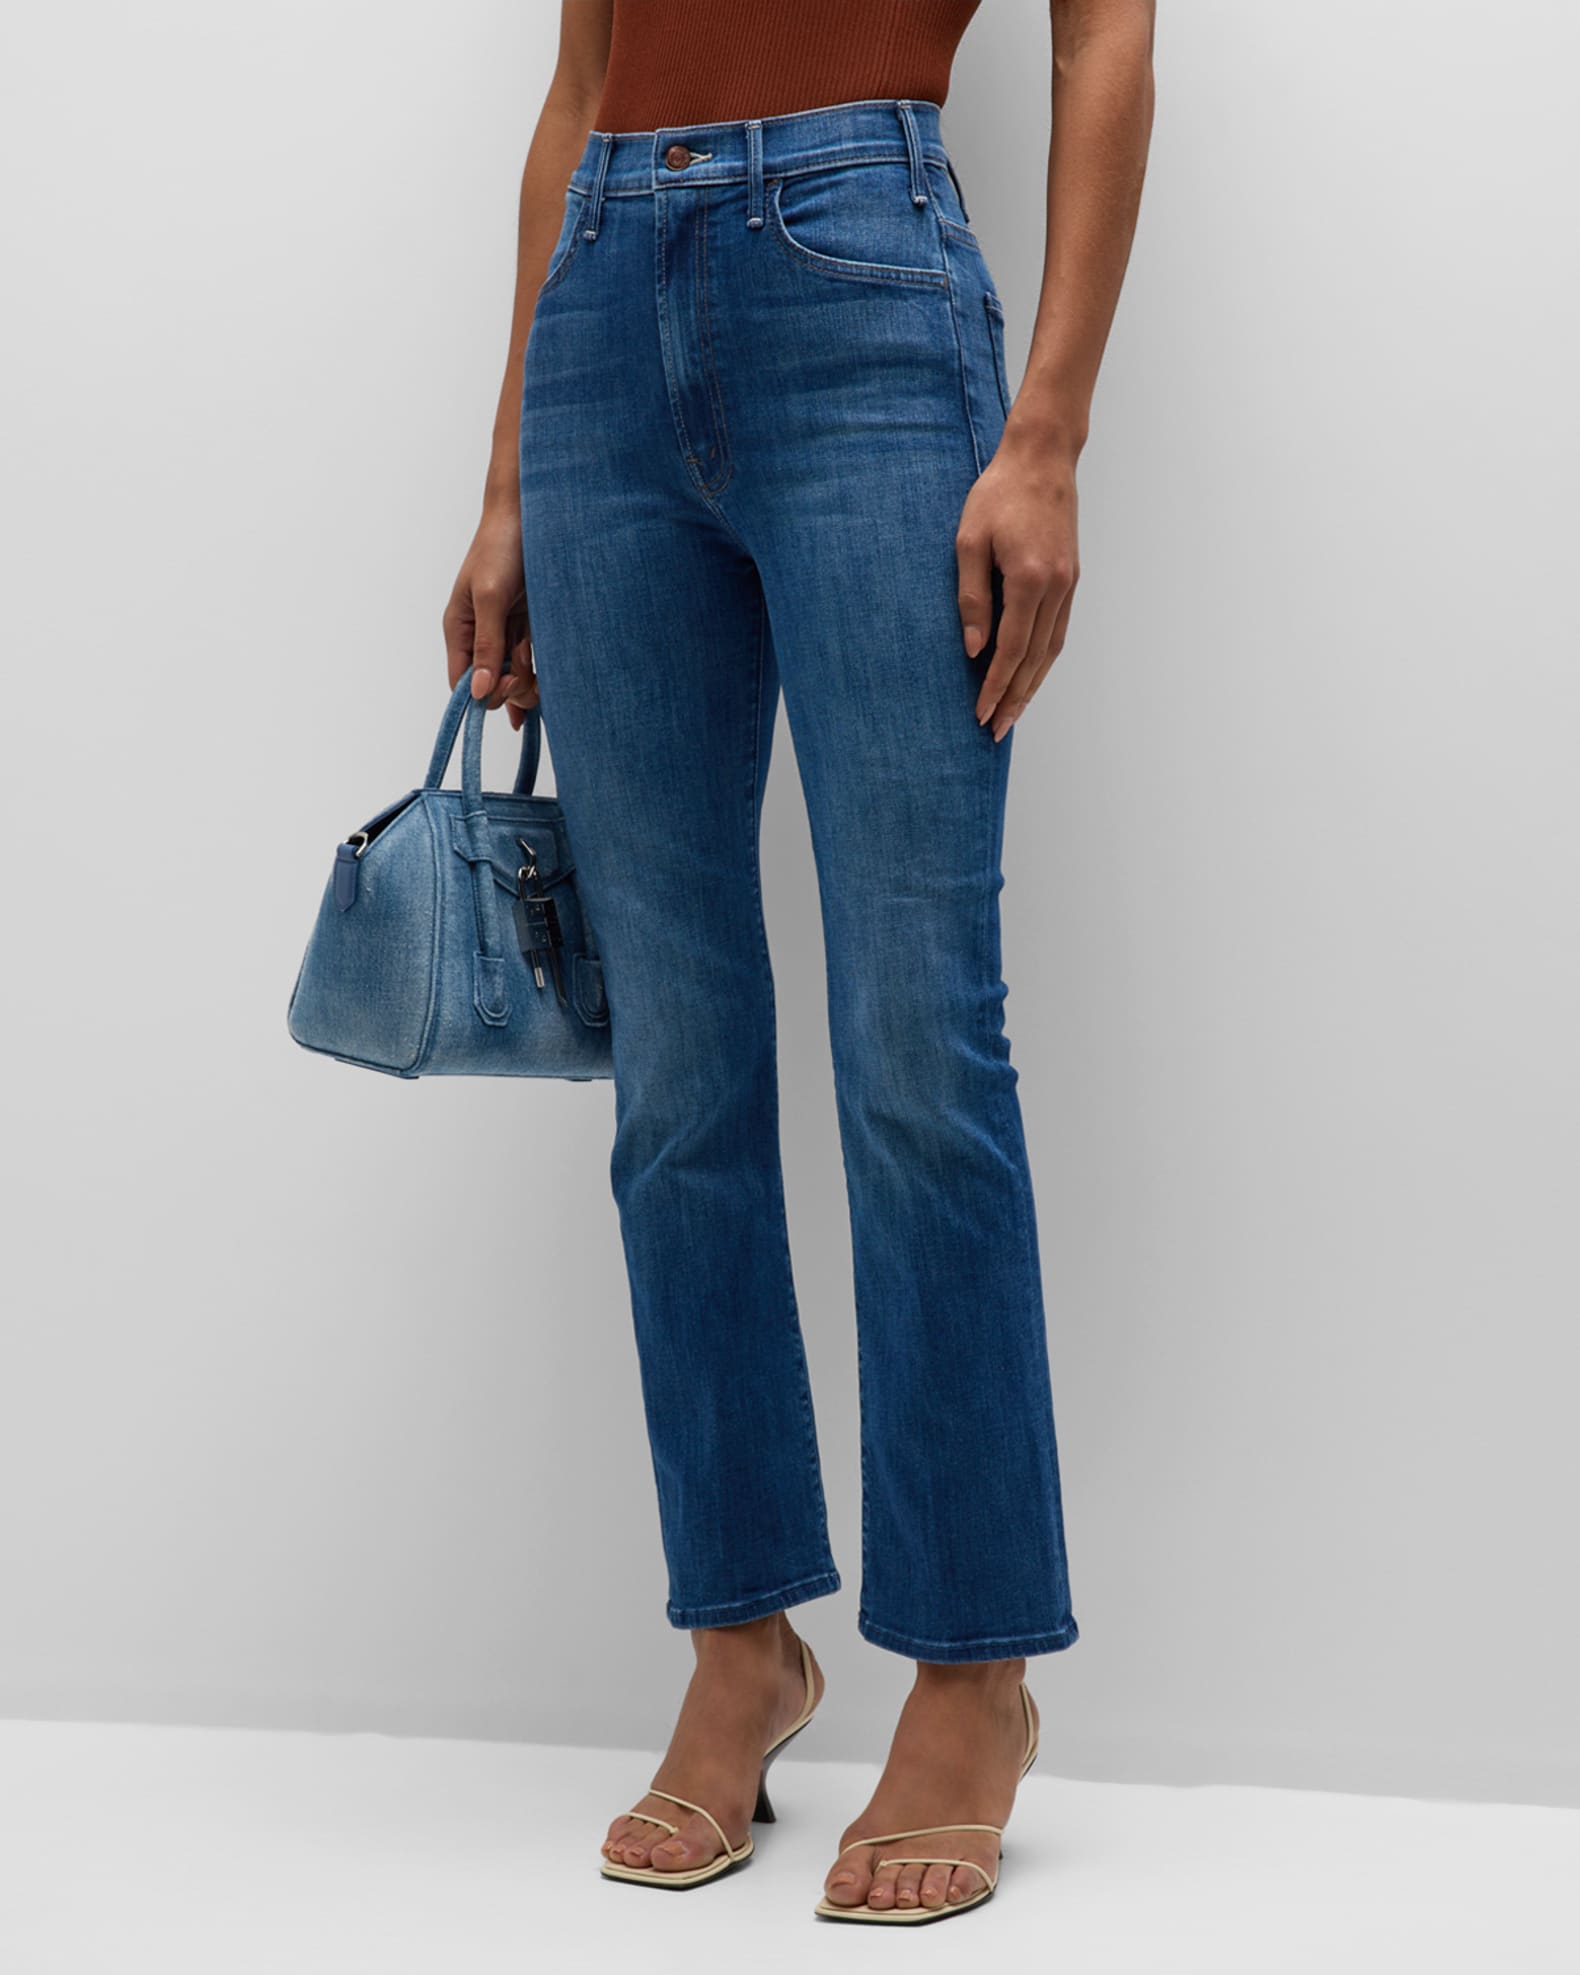 MOTHER The Hustler Ankle Jeans | Neiman Marcus